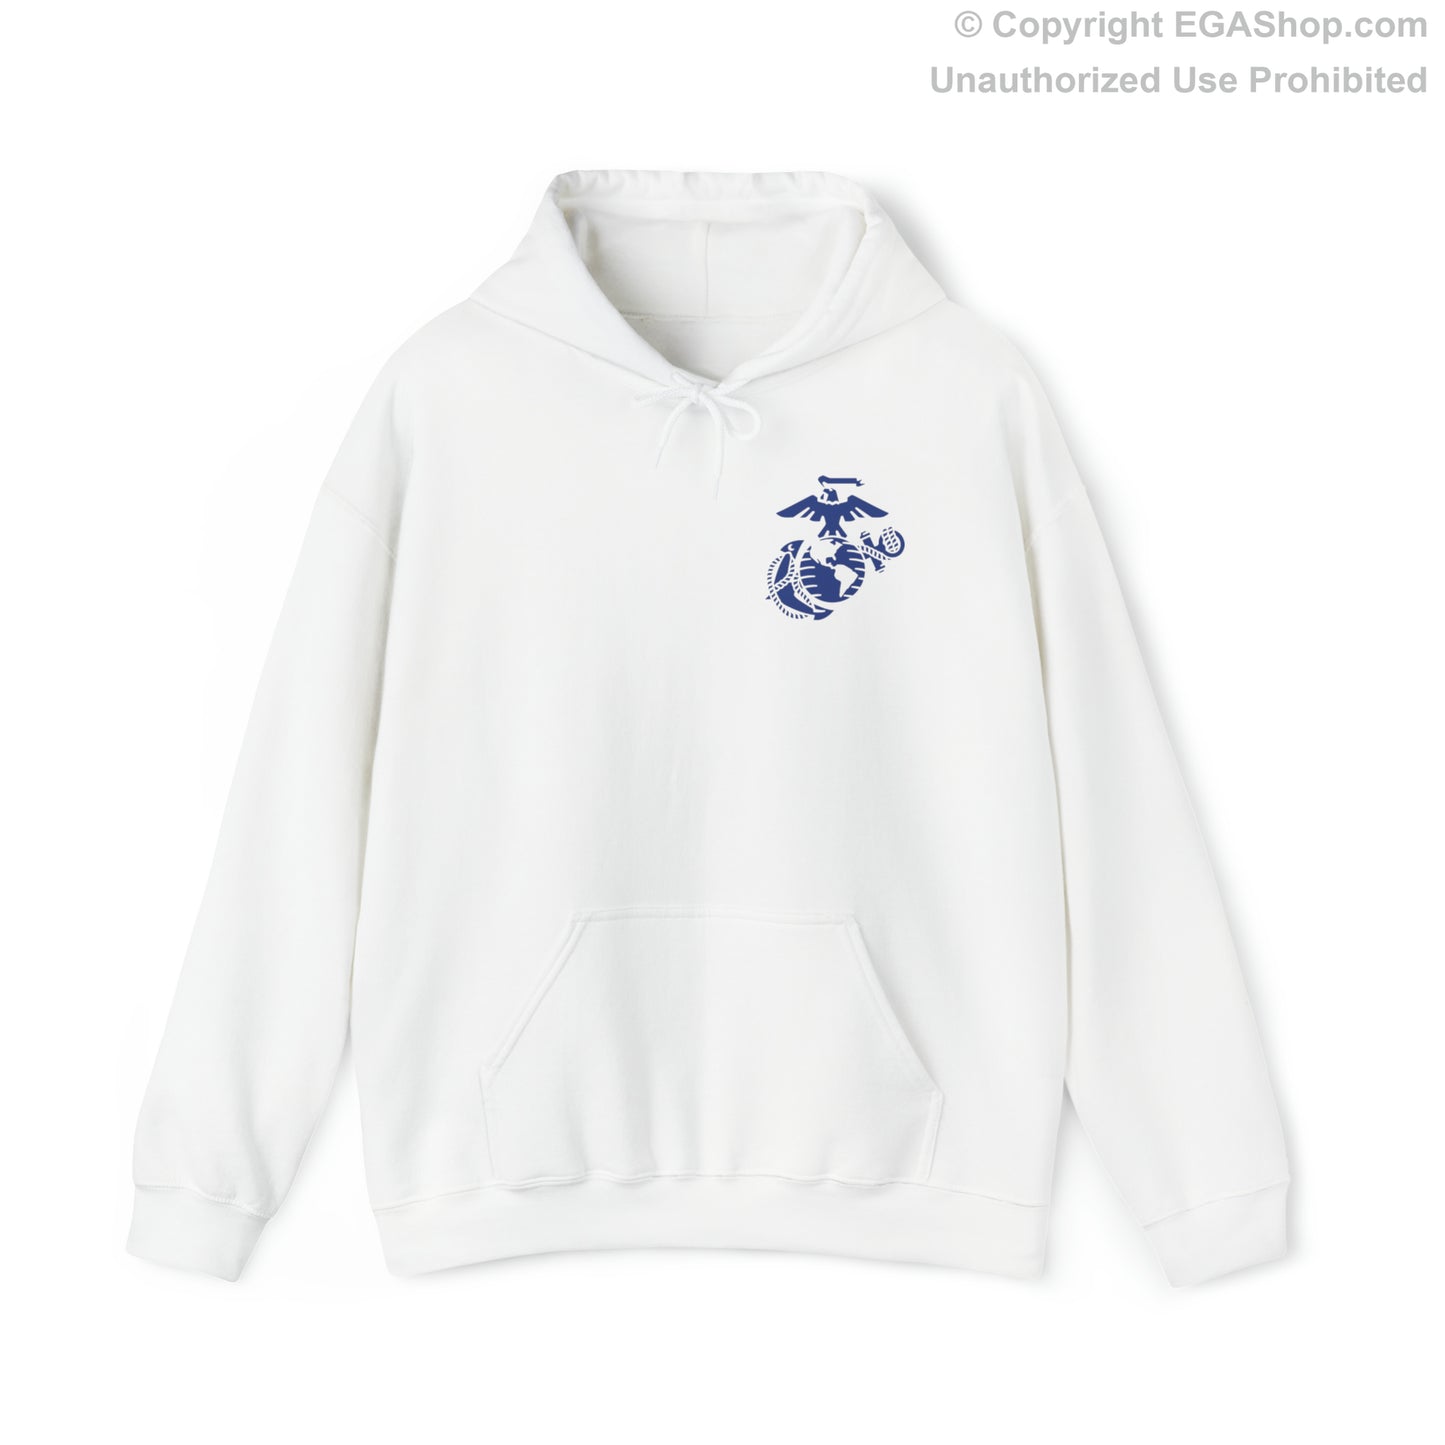 Hoodie: Mike Co. MCRD San Diego (3rd Battalion Crest on BACK)